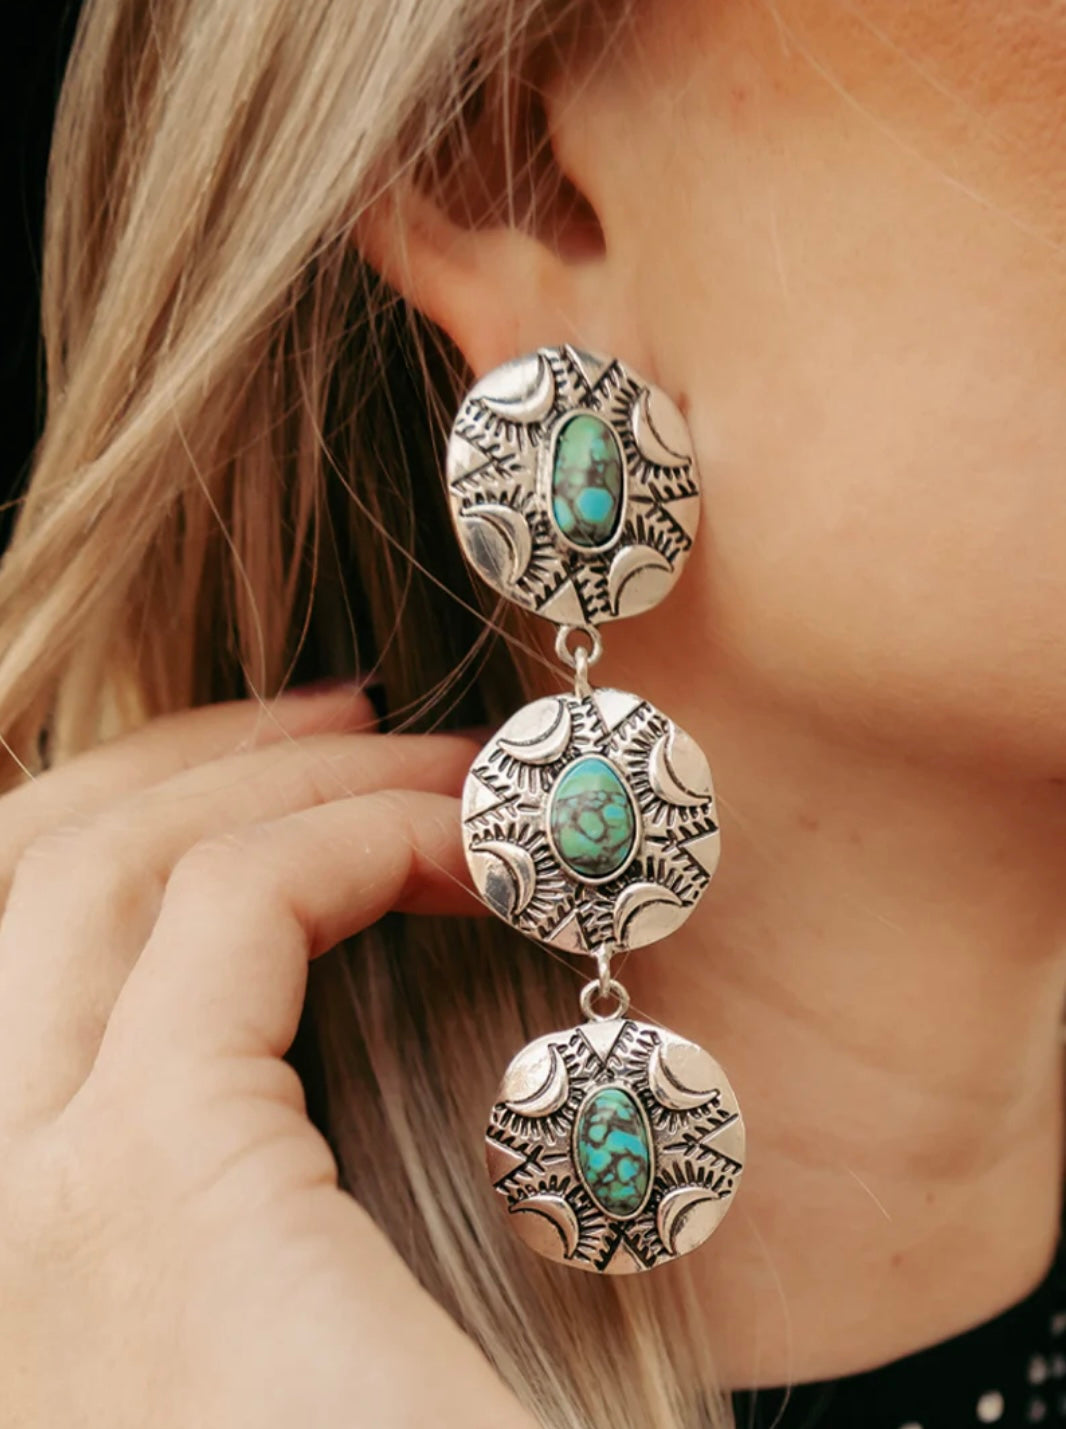 The Concho Valley Earrings